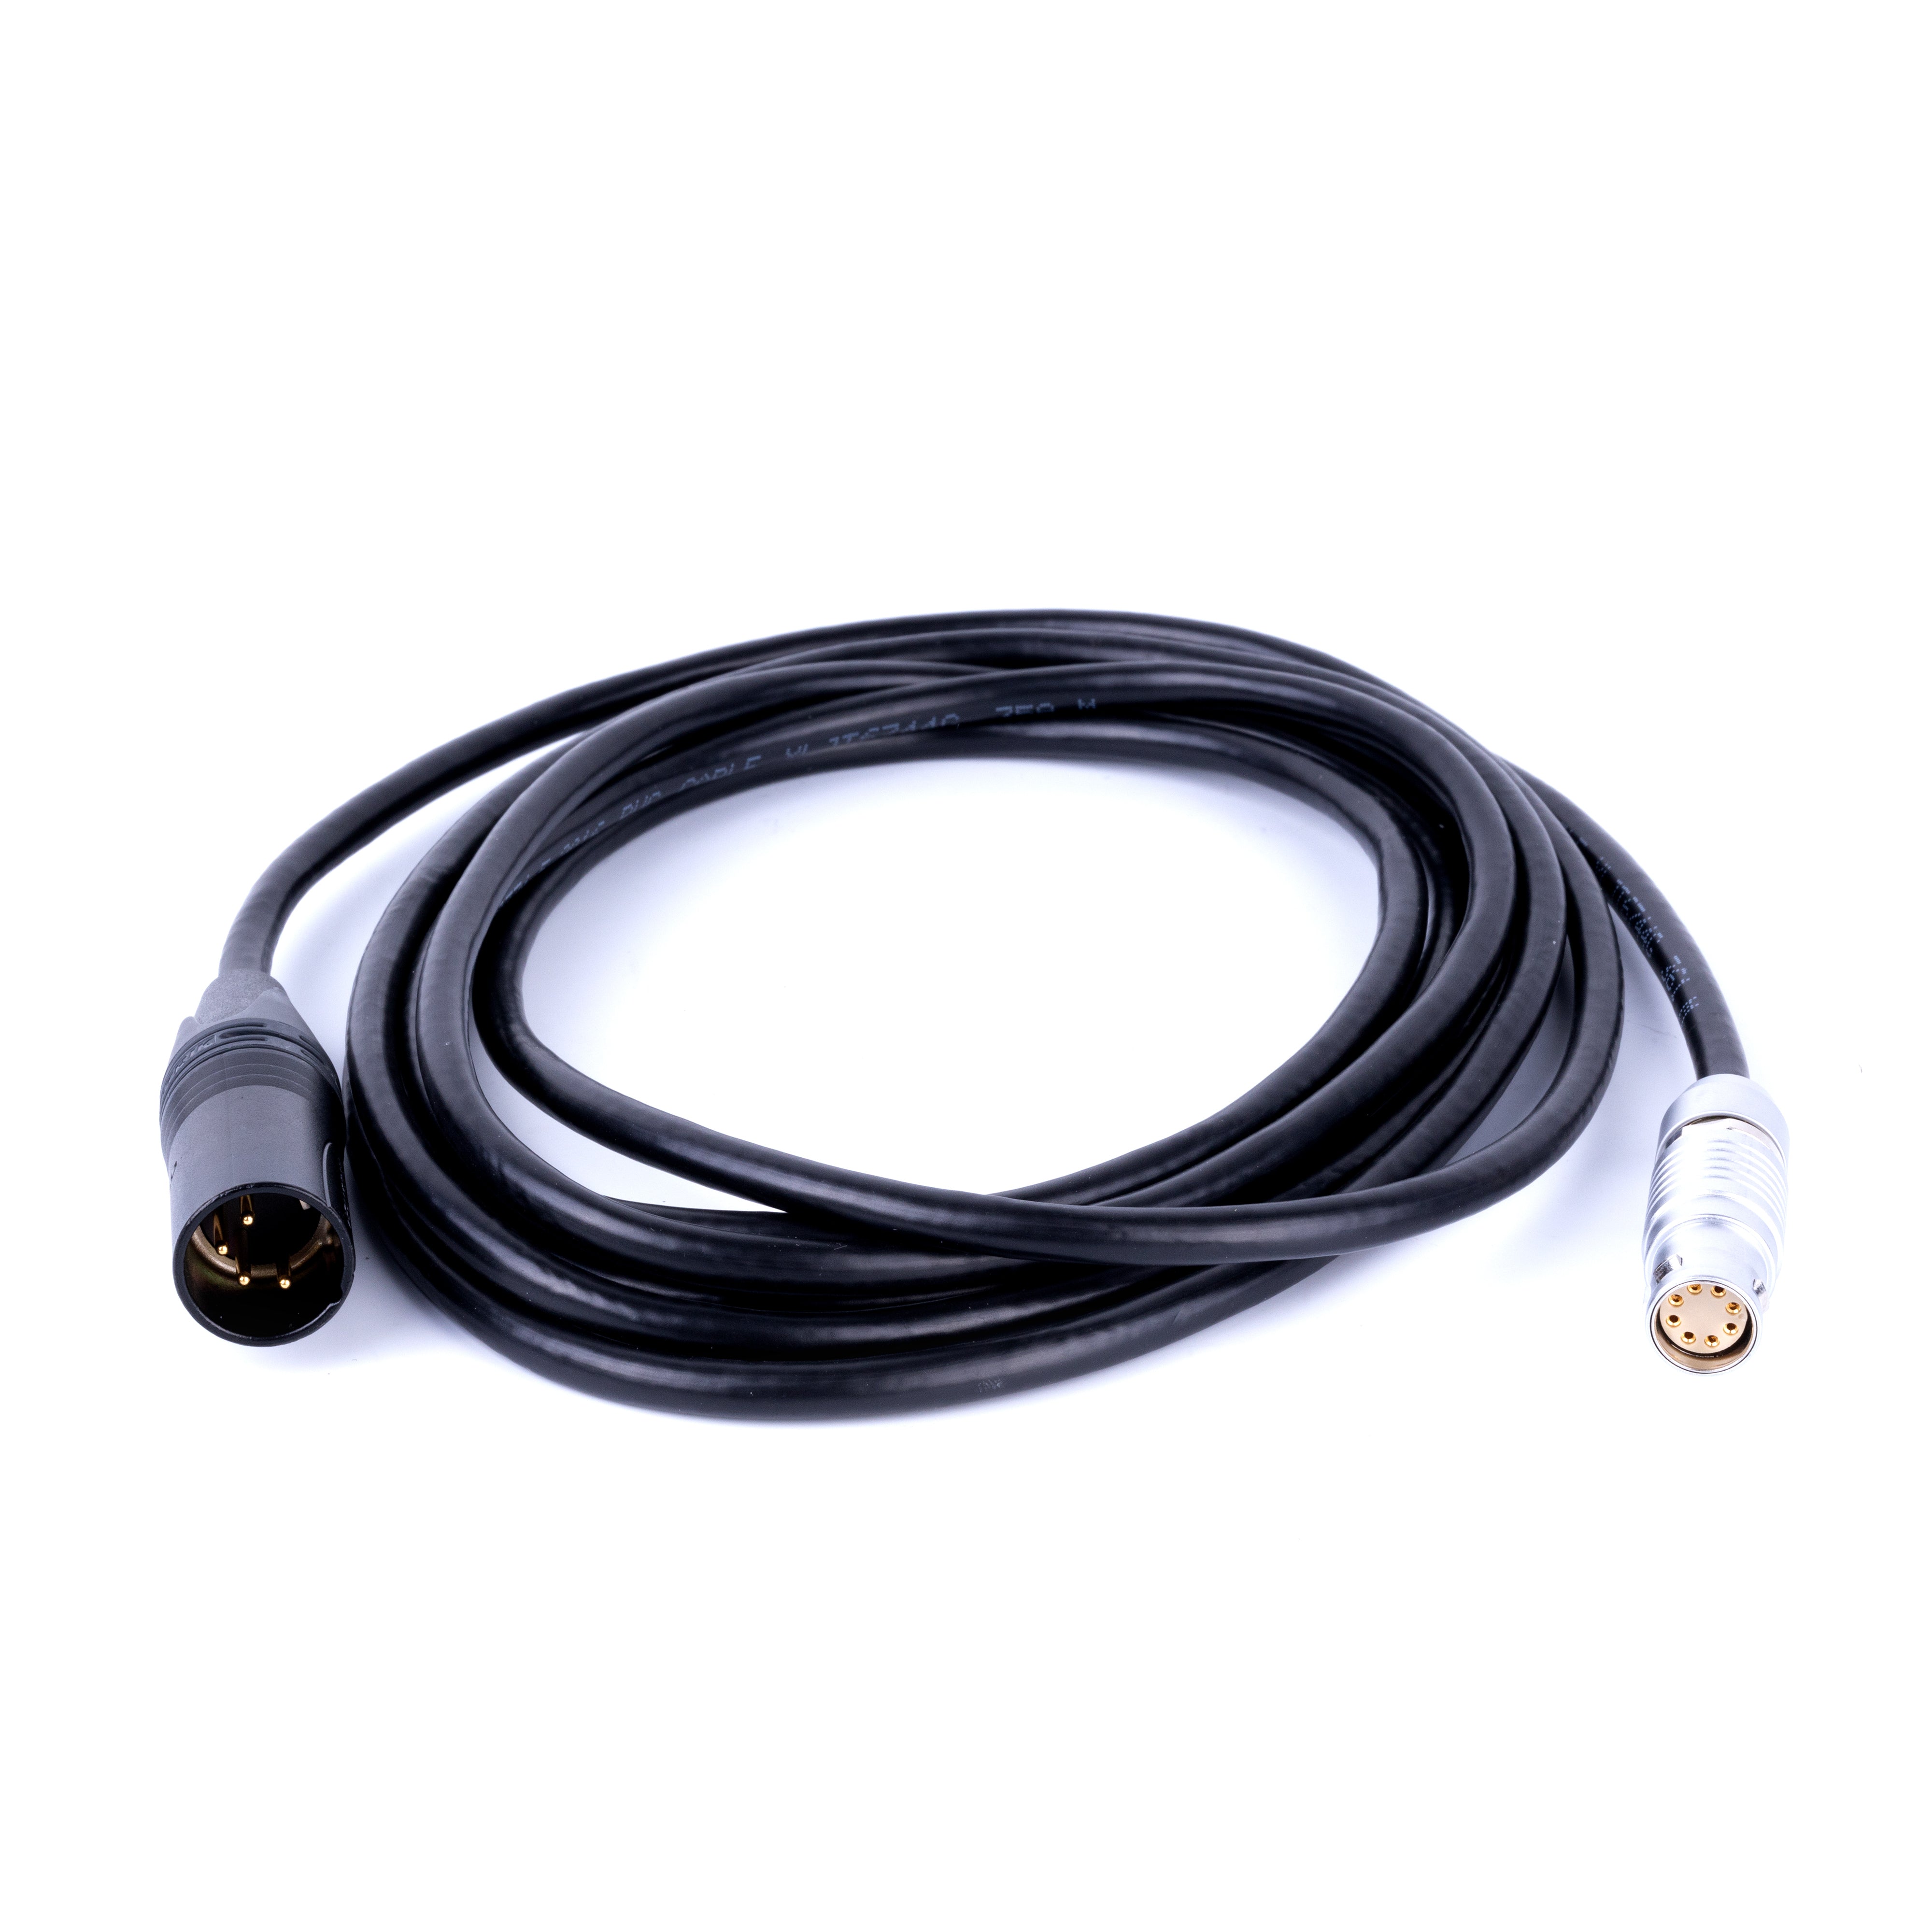 4 pin XLR Power Cable for ARRI Cameras